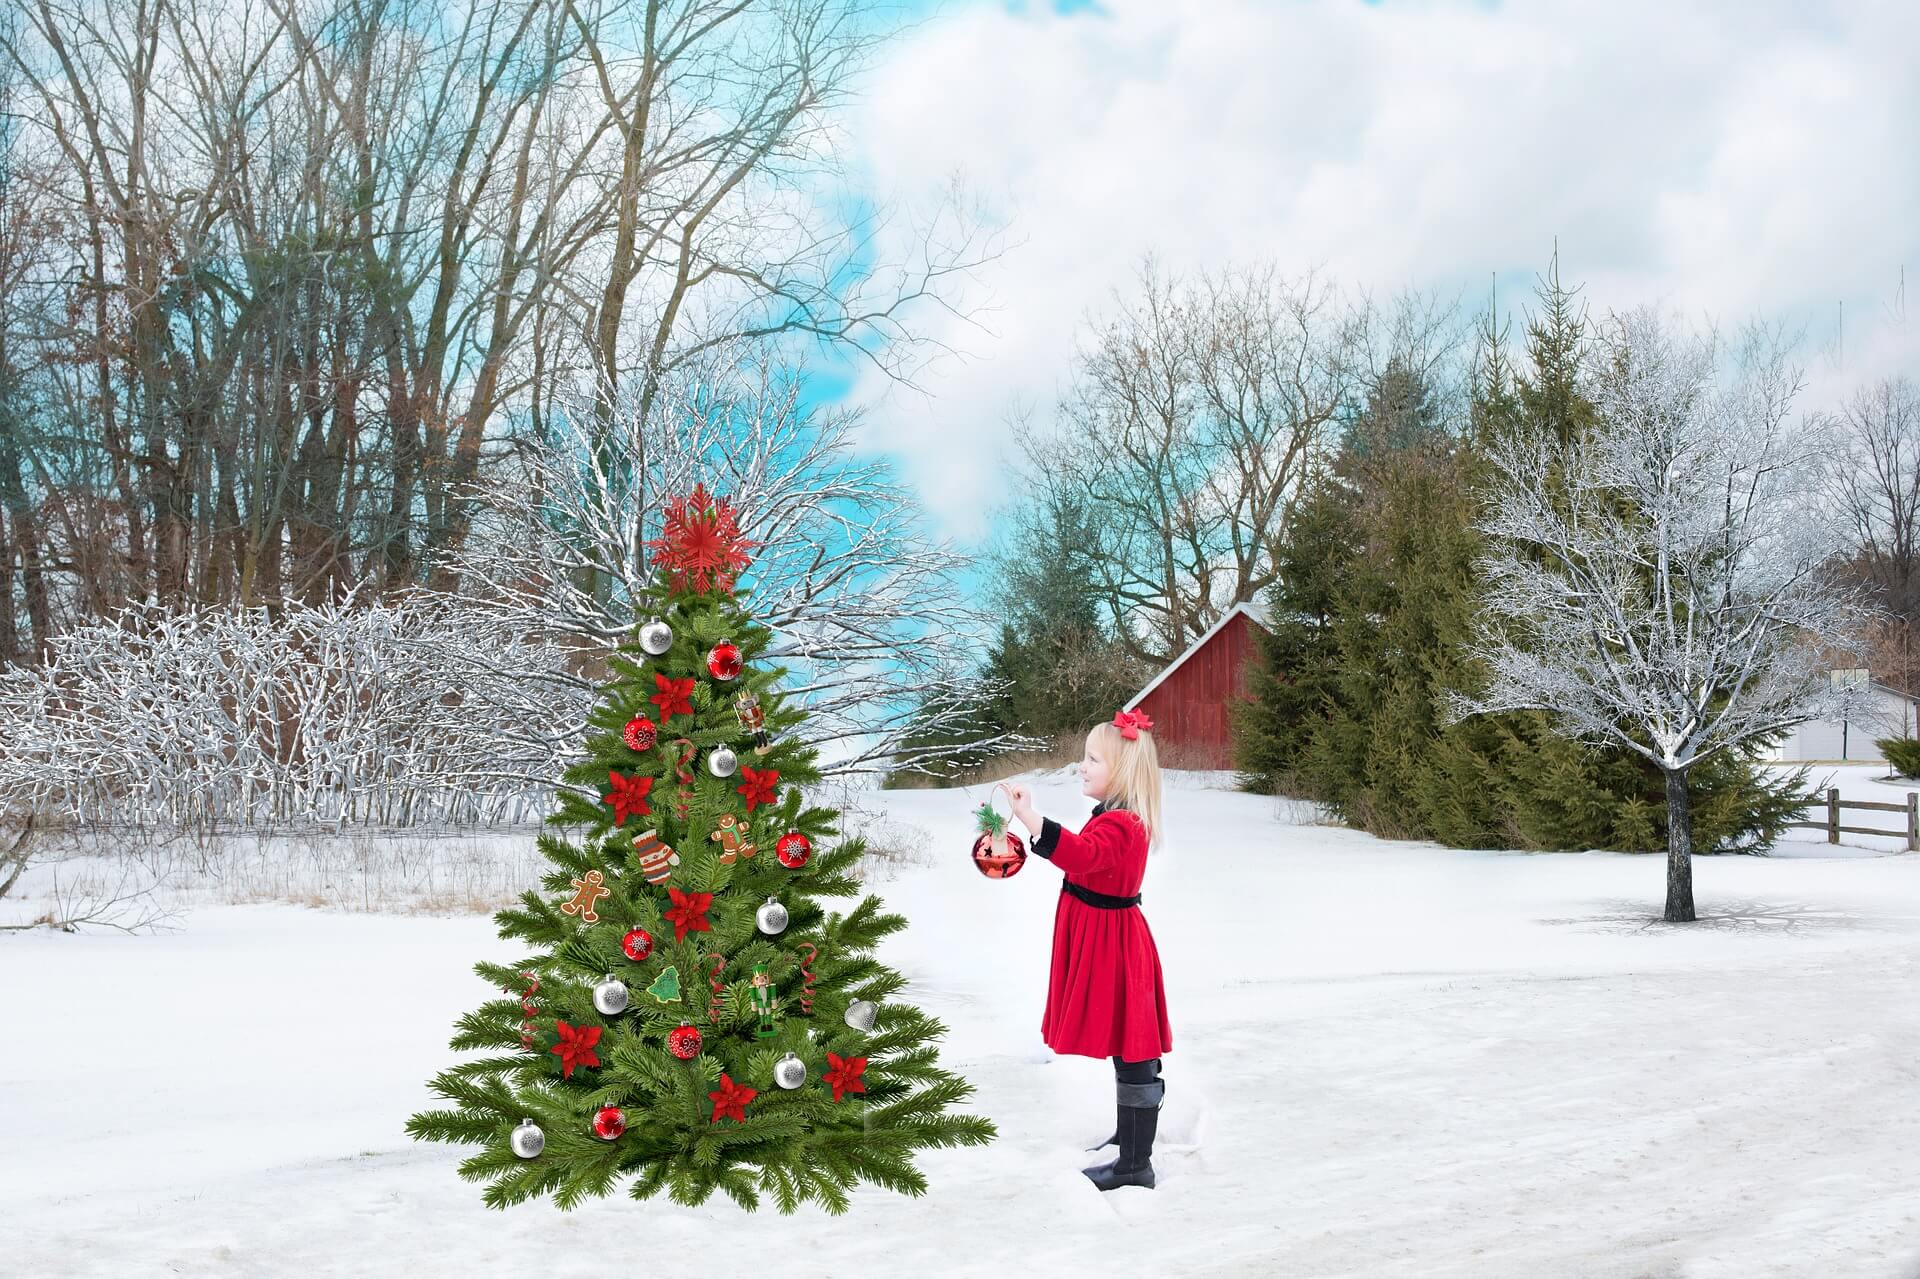 holiday decorating, decorating safety, security specialists decorating tips, security specialists safety tips, security specialists decorating safety tips, access control, barrier gates, video surveillance, burglary prevention, theft alarm, intrusion protection, stamford security, CT security